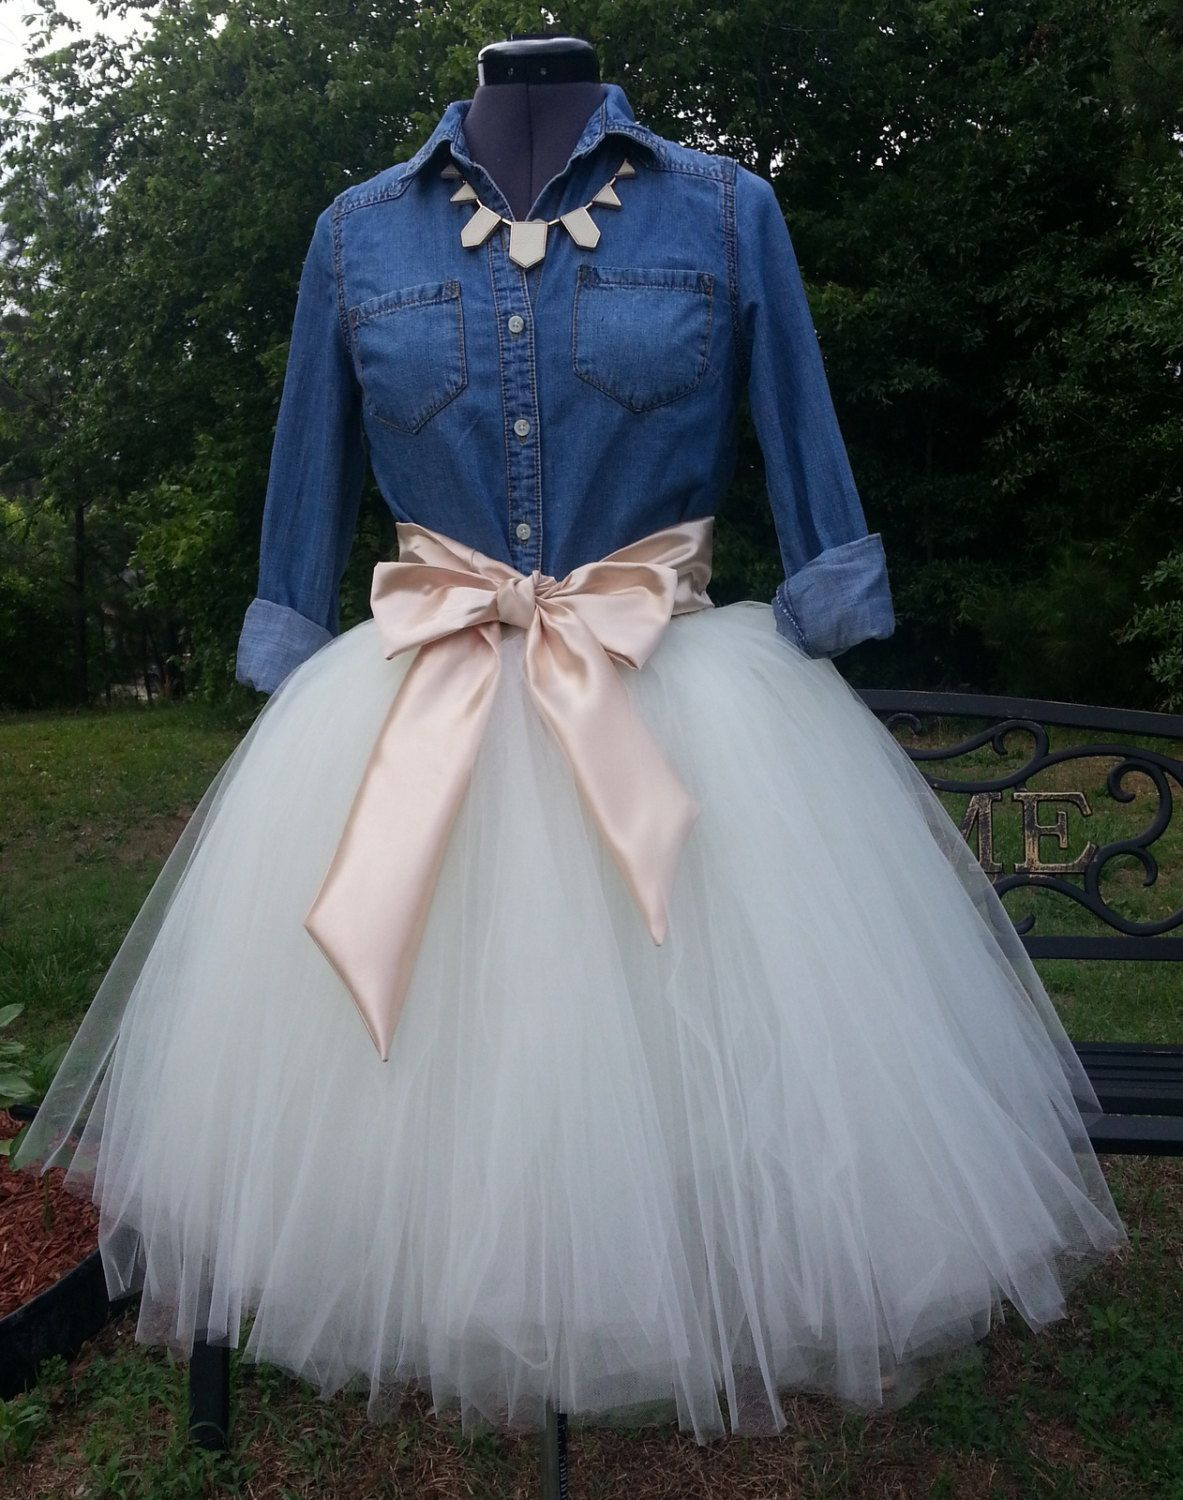 Tutu Skirt For Adults DIY
 Custom Made Adult Ivory Tulle Tutu Style Skirt for by